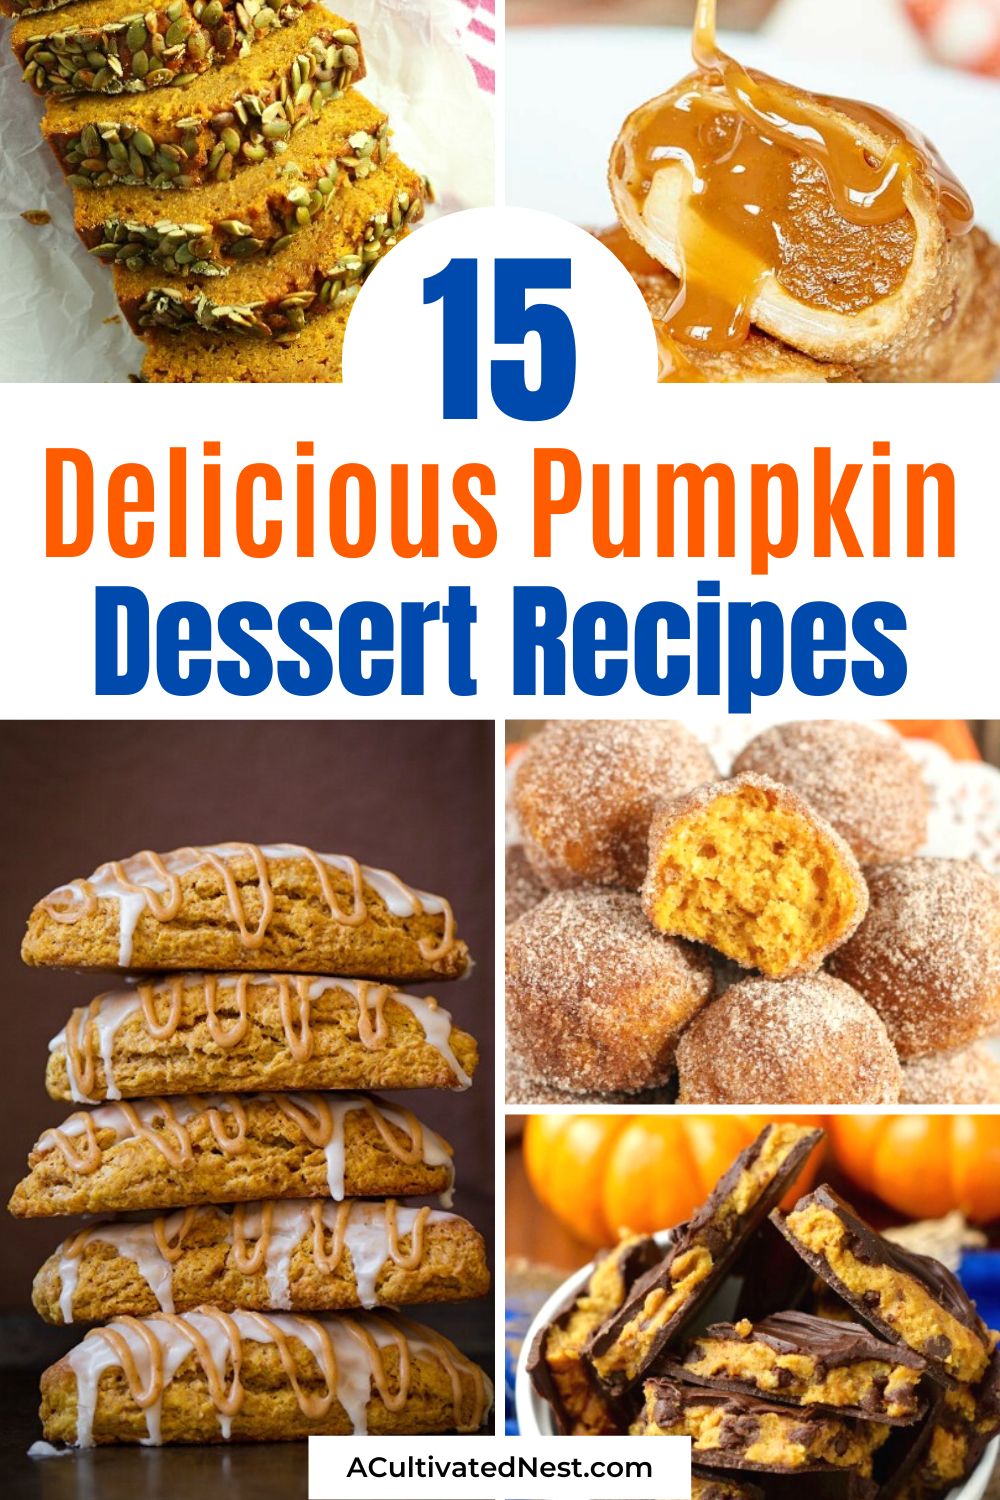 15 Delicious Pumpkin Dessert Recipes- Pumpkin is the perfect fall ingredient! And not only are pumpkins full of healthy nutrients, but they're also really tasty! This fall, try some of these pumpkin dessert recipes! | #dessertRecipes #fallRecipes #recipes #pumpkinRecipes #ACultivatedNest